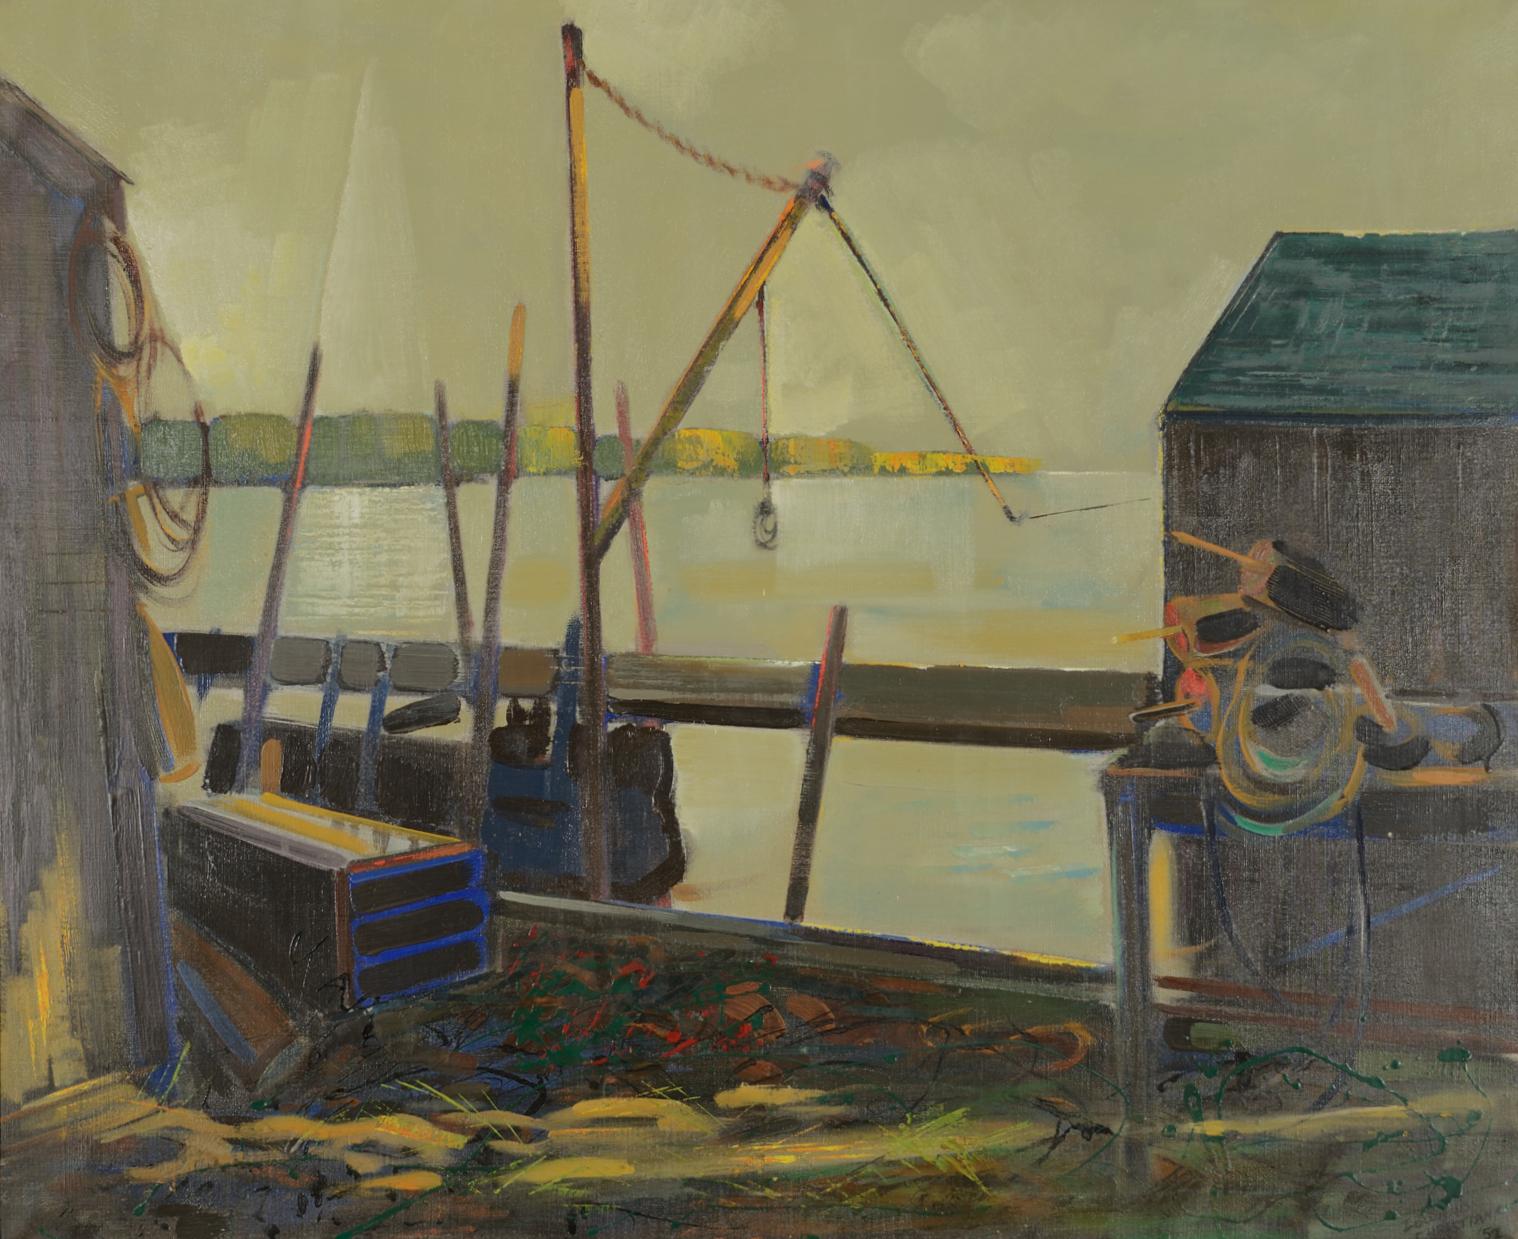 A modernist coastal/dock scene by Edward Christiana. 

This painting is hand-signed "Edward Chrstiana '52" lower right.

Exhibited:
1946  Munson-Williams-Proctor Institute; 9th Annual Exhibition
2004  Jameson Gallery, Portland, Maine; Edward